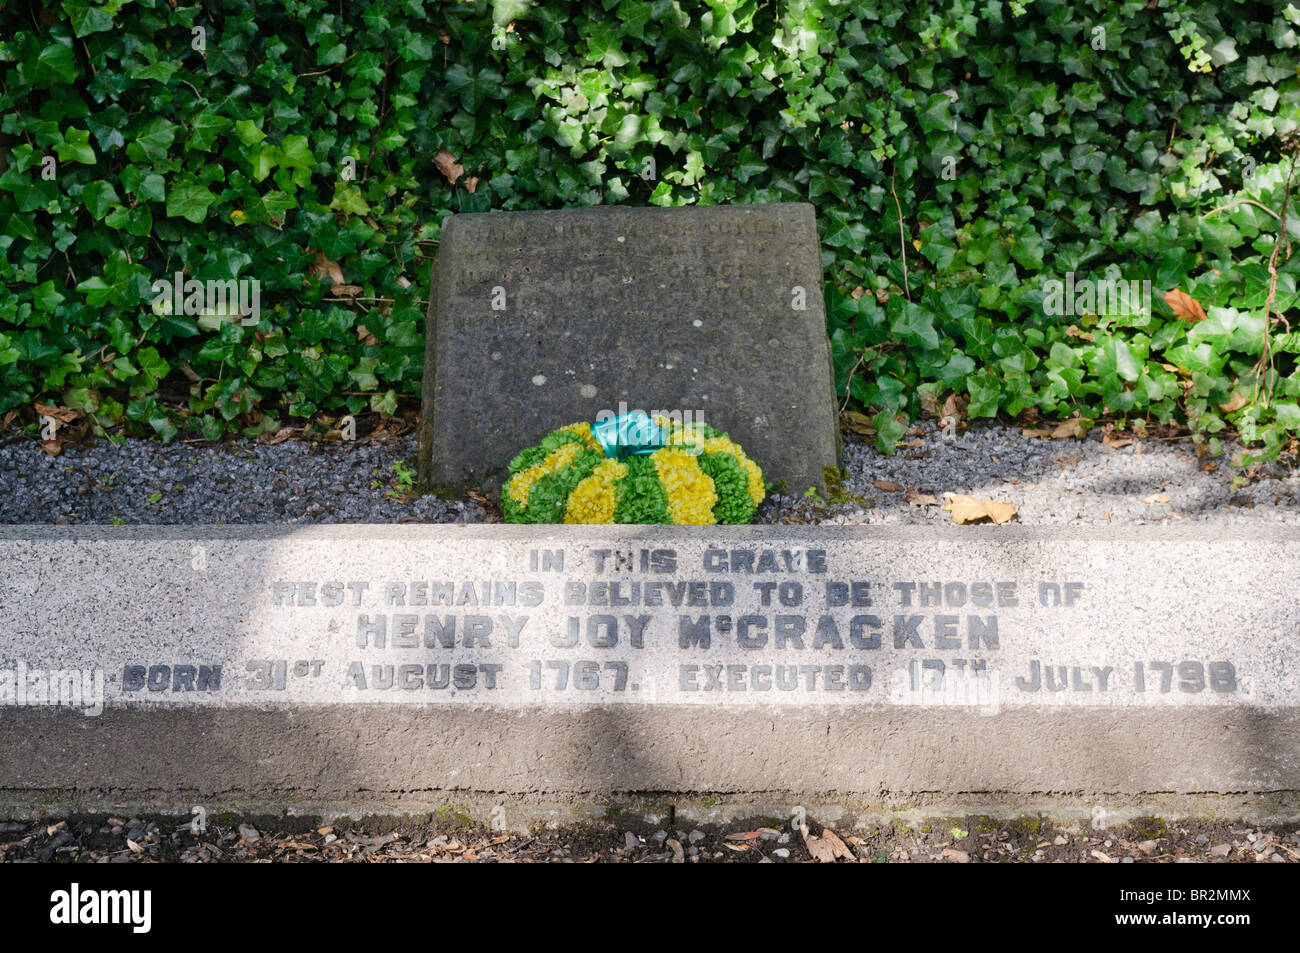 Grave of Henry Joy McCracken, founder of the United Irishmen who lead the 1798 Irish Rebellion and was subsequently executed. Stock Photo